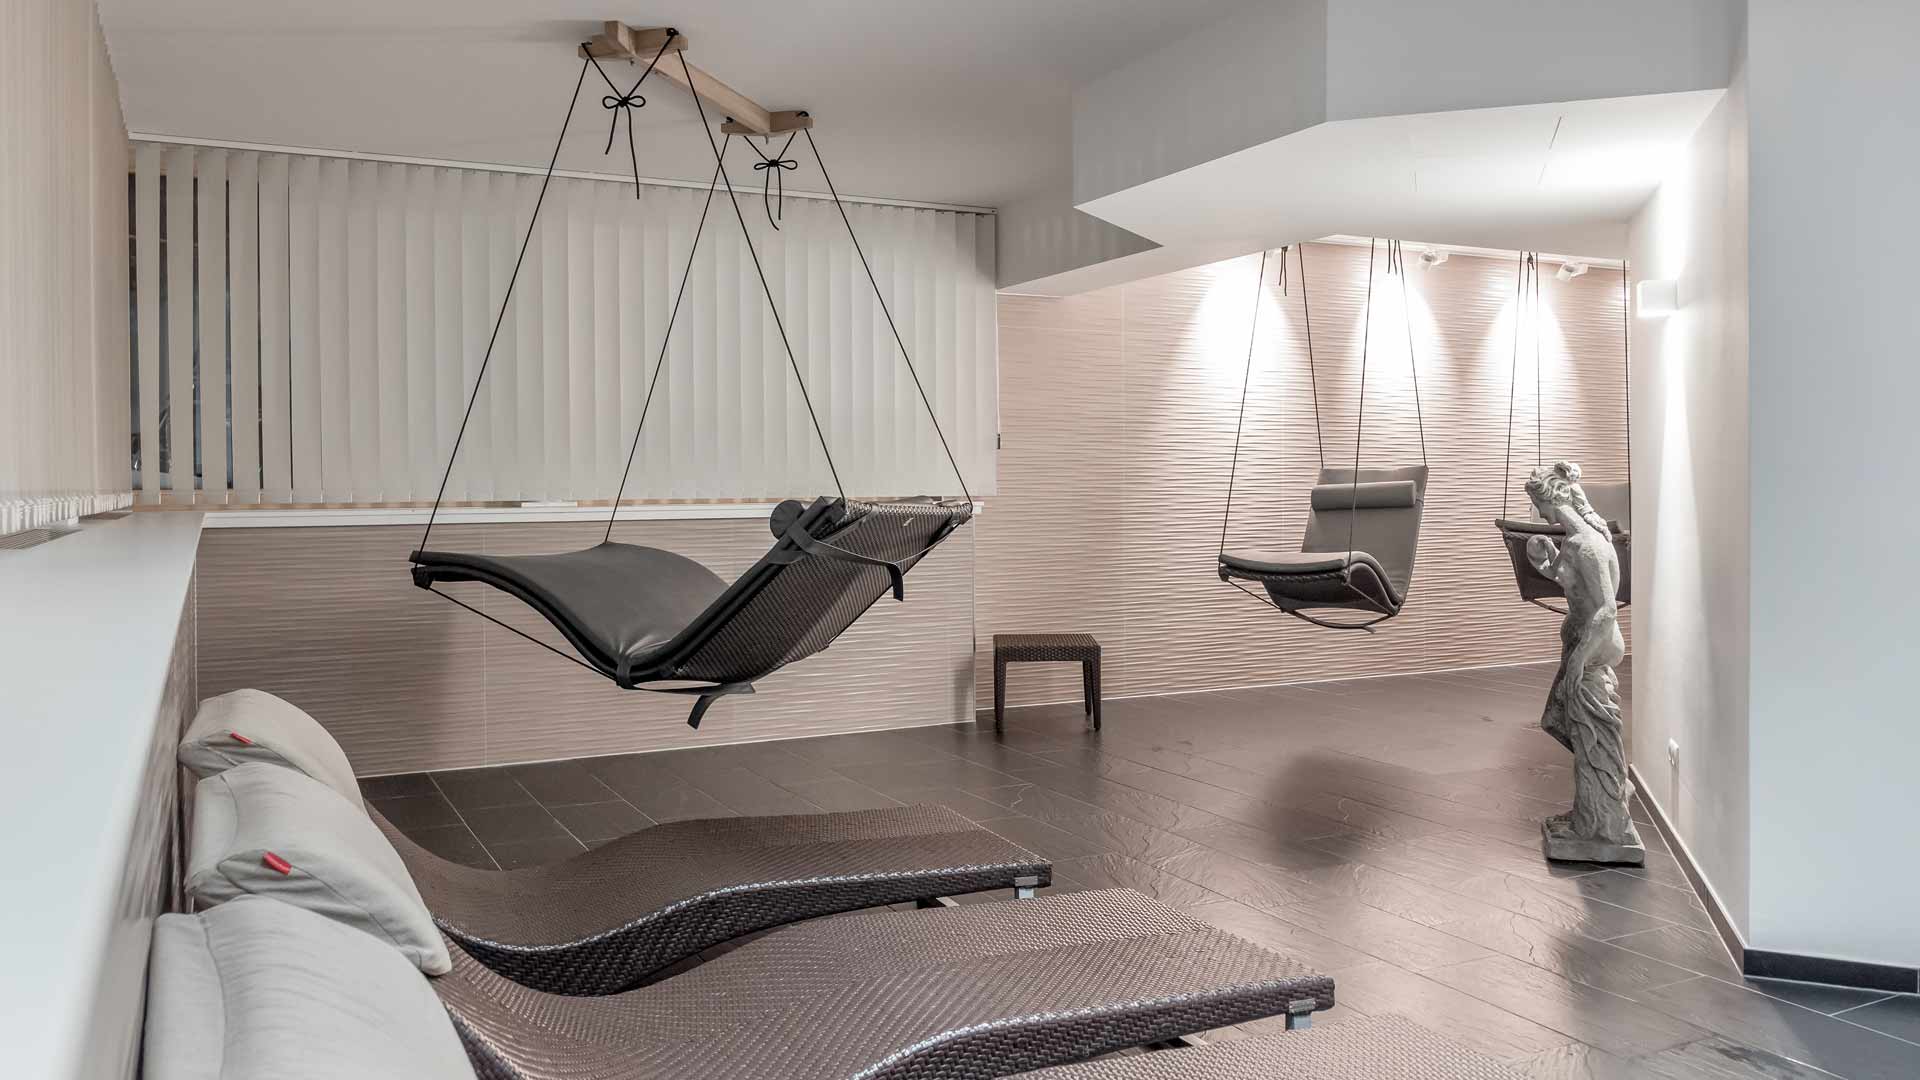 The hoverloungers relax you after your skiing day